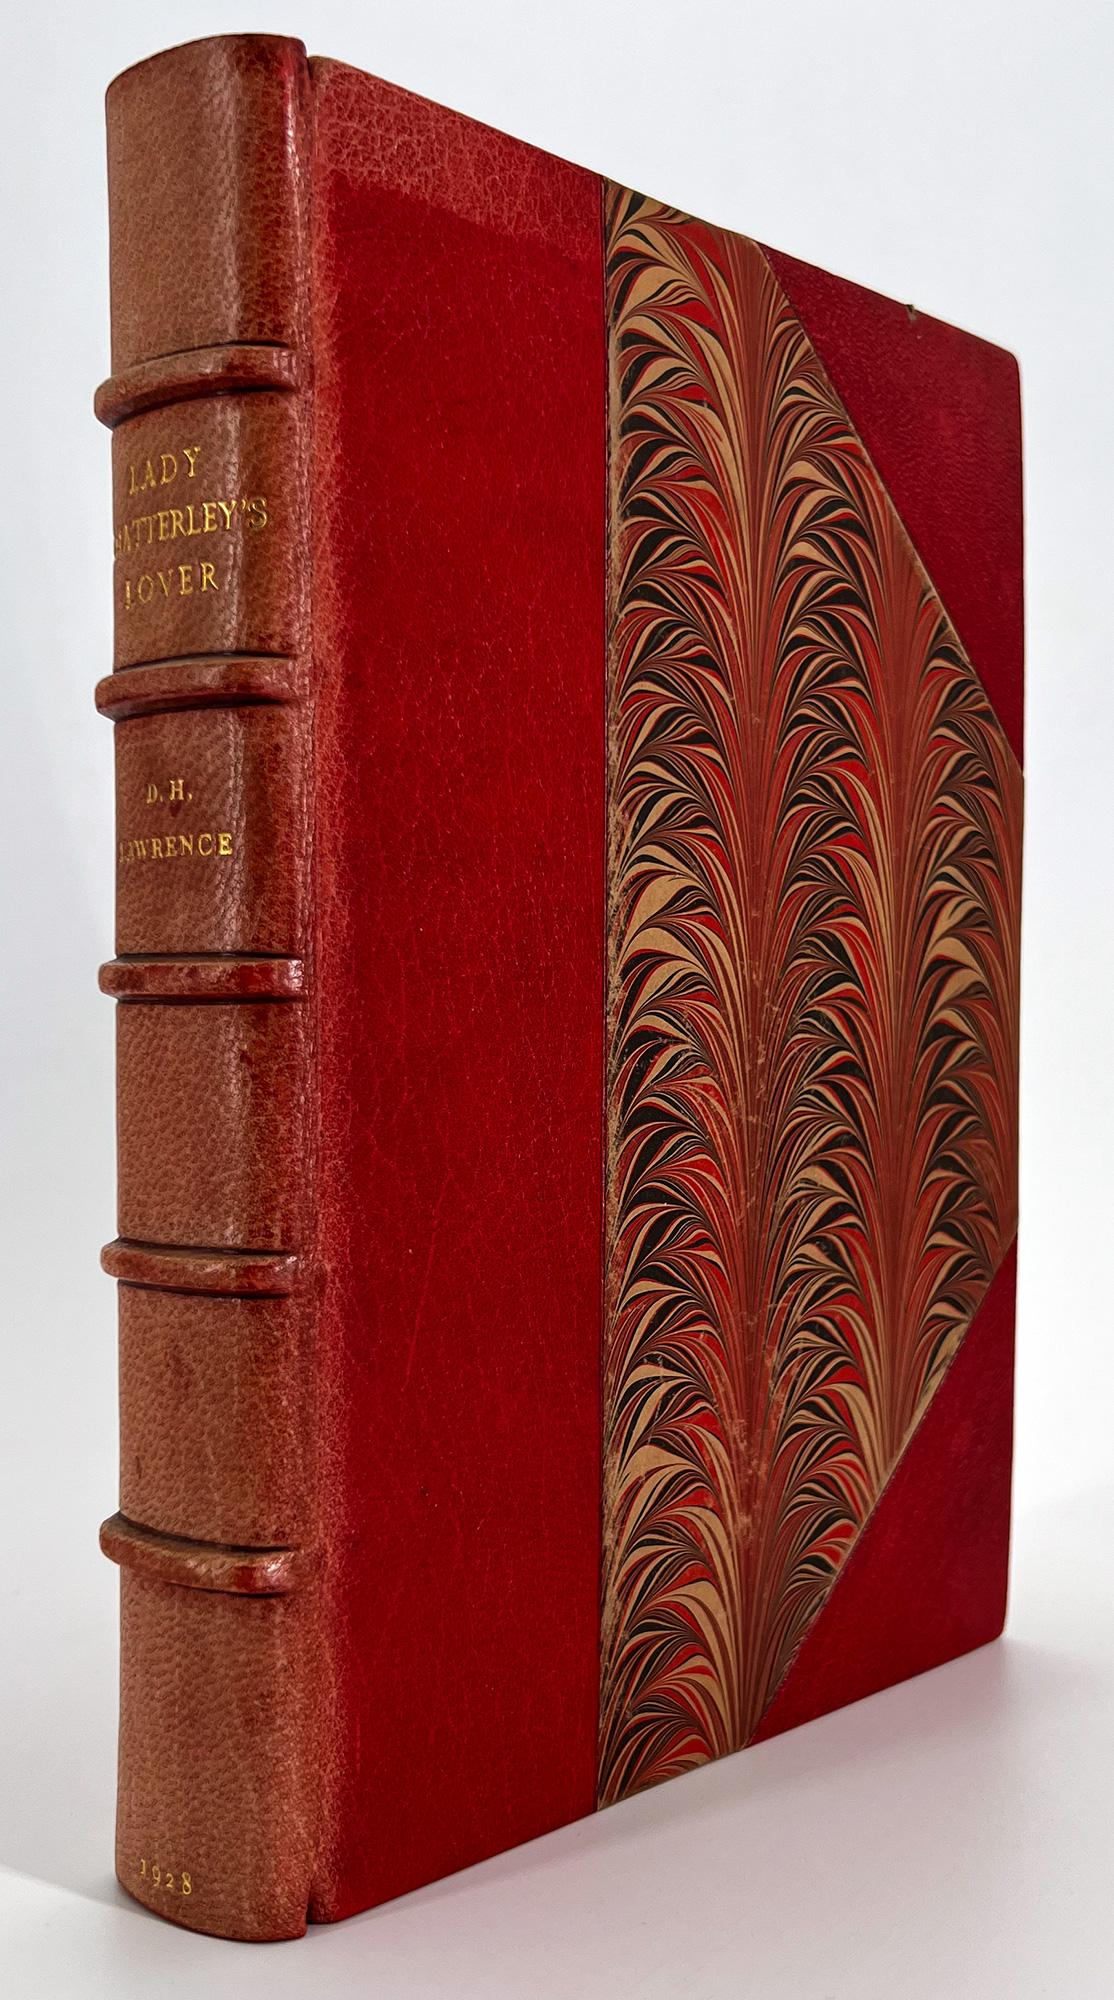 An early PIRATED edition of the scandalous novel by D.H. Lawrence.

Privately Printed, 1928. 
8vo, 8 7/8 x 6 1/4 in. (225 x 158 mm); half title, Limitation page, title, 365 pp. 3/4 red crushed morocco binding with marbled boards and matching